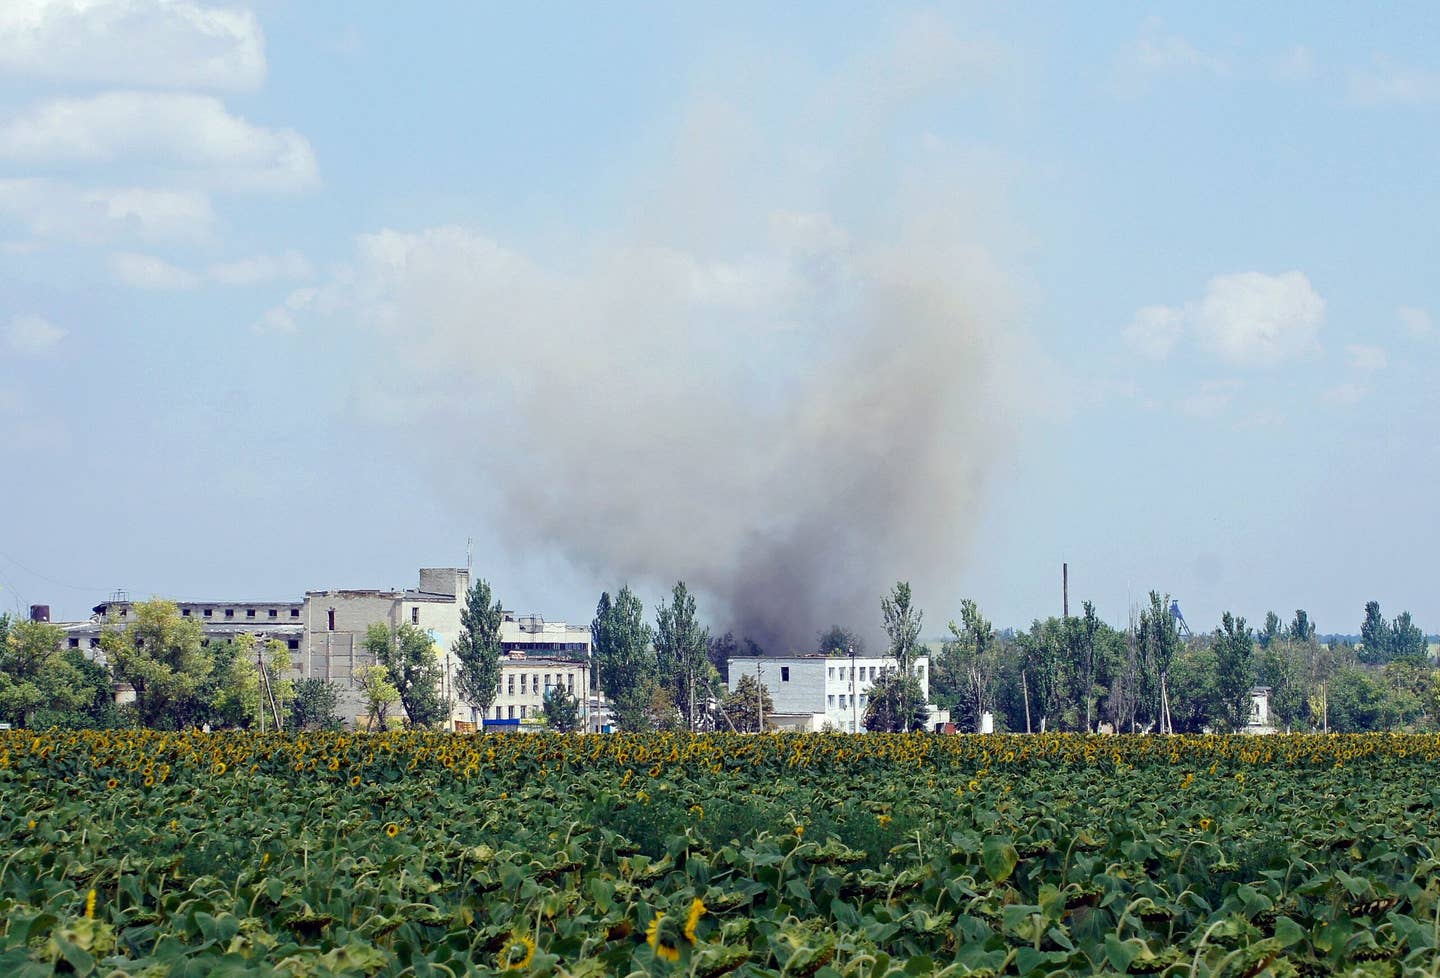 A picture shows smoke rising over buildings during shelling in the village of Maryinka, a suburb of Donetsk in eastern Ukraine, on August 5, 2014. (Photo by ANDREY KRASNOSCHEKOV/AFP via Getty Images)